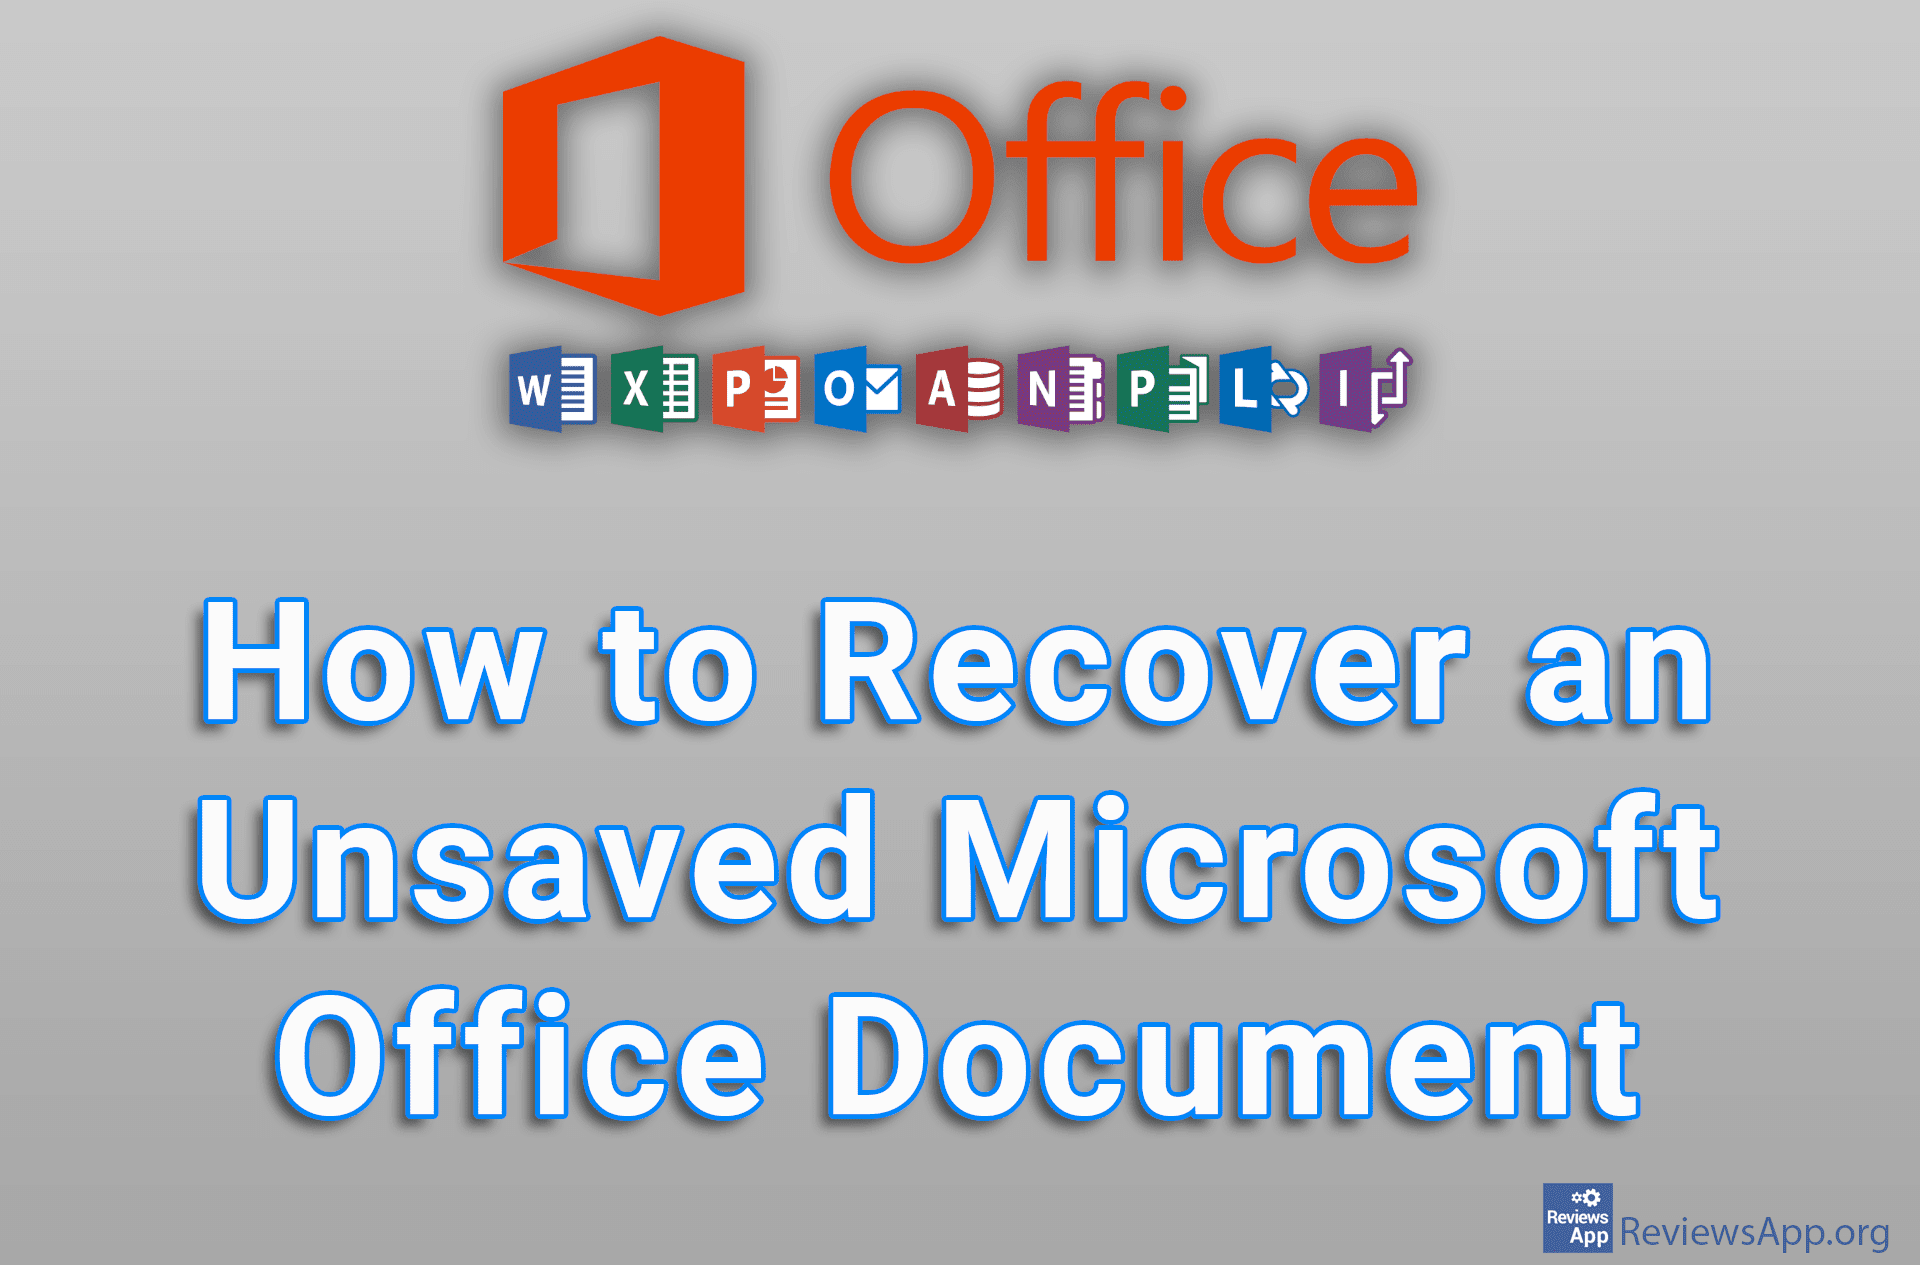 How to Recover an Unsaved Microsoft Office Document